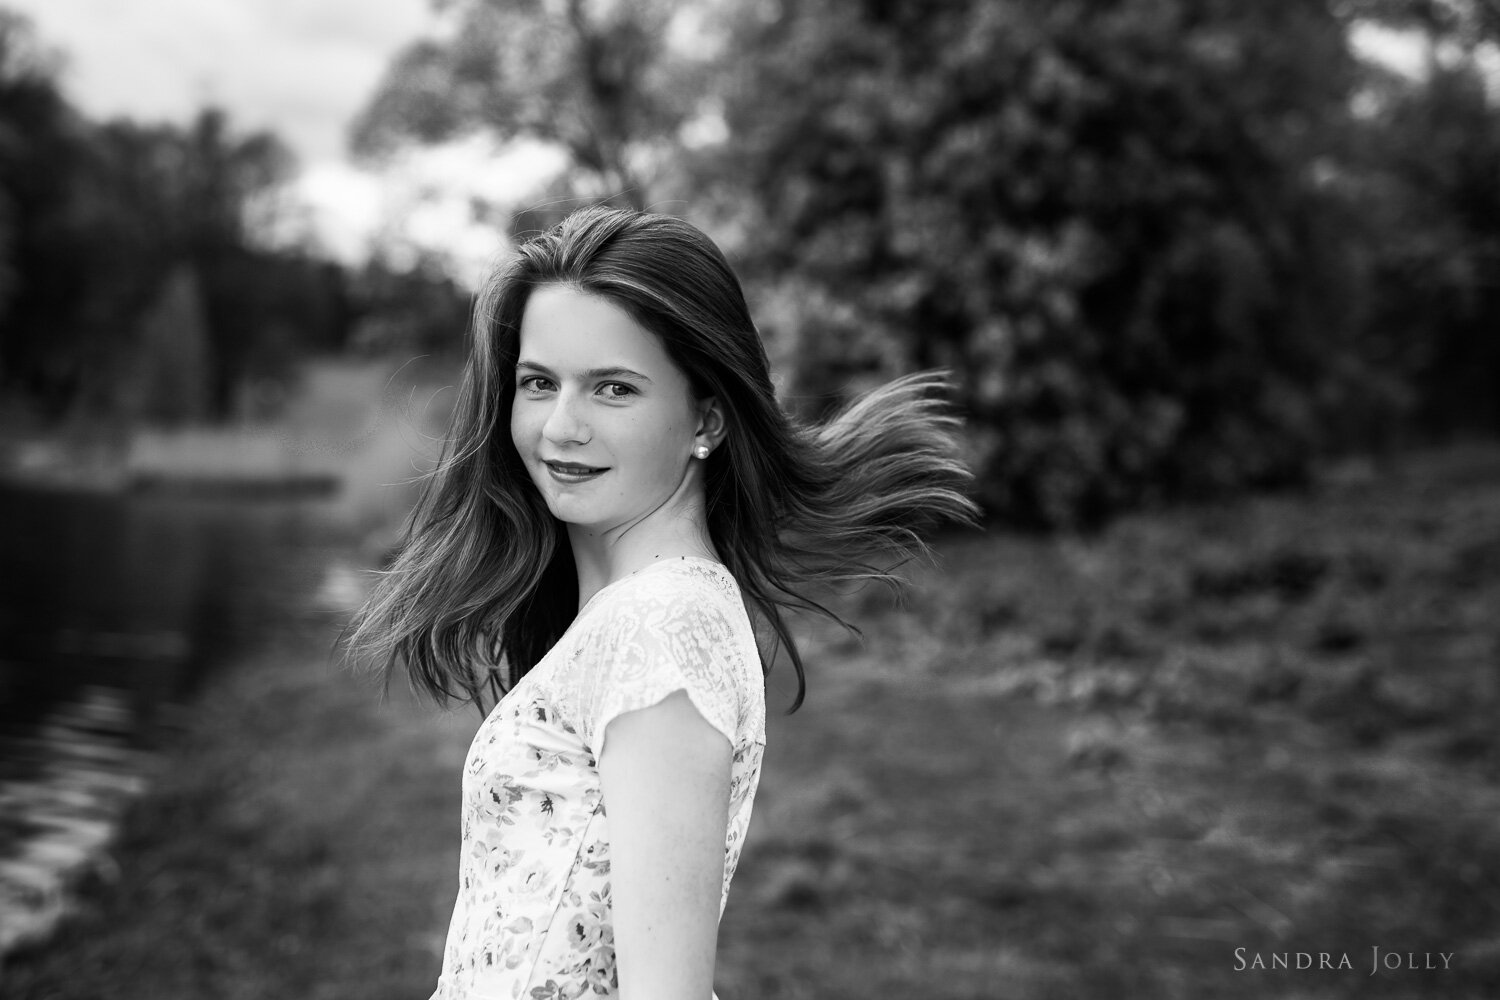 black-and-white-portrait-teen-girl-with hair-blowing-by-sandra-jolly-photography.jpg